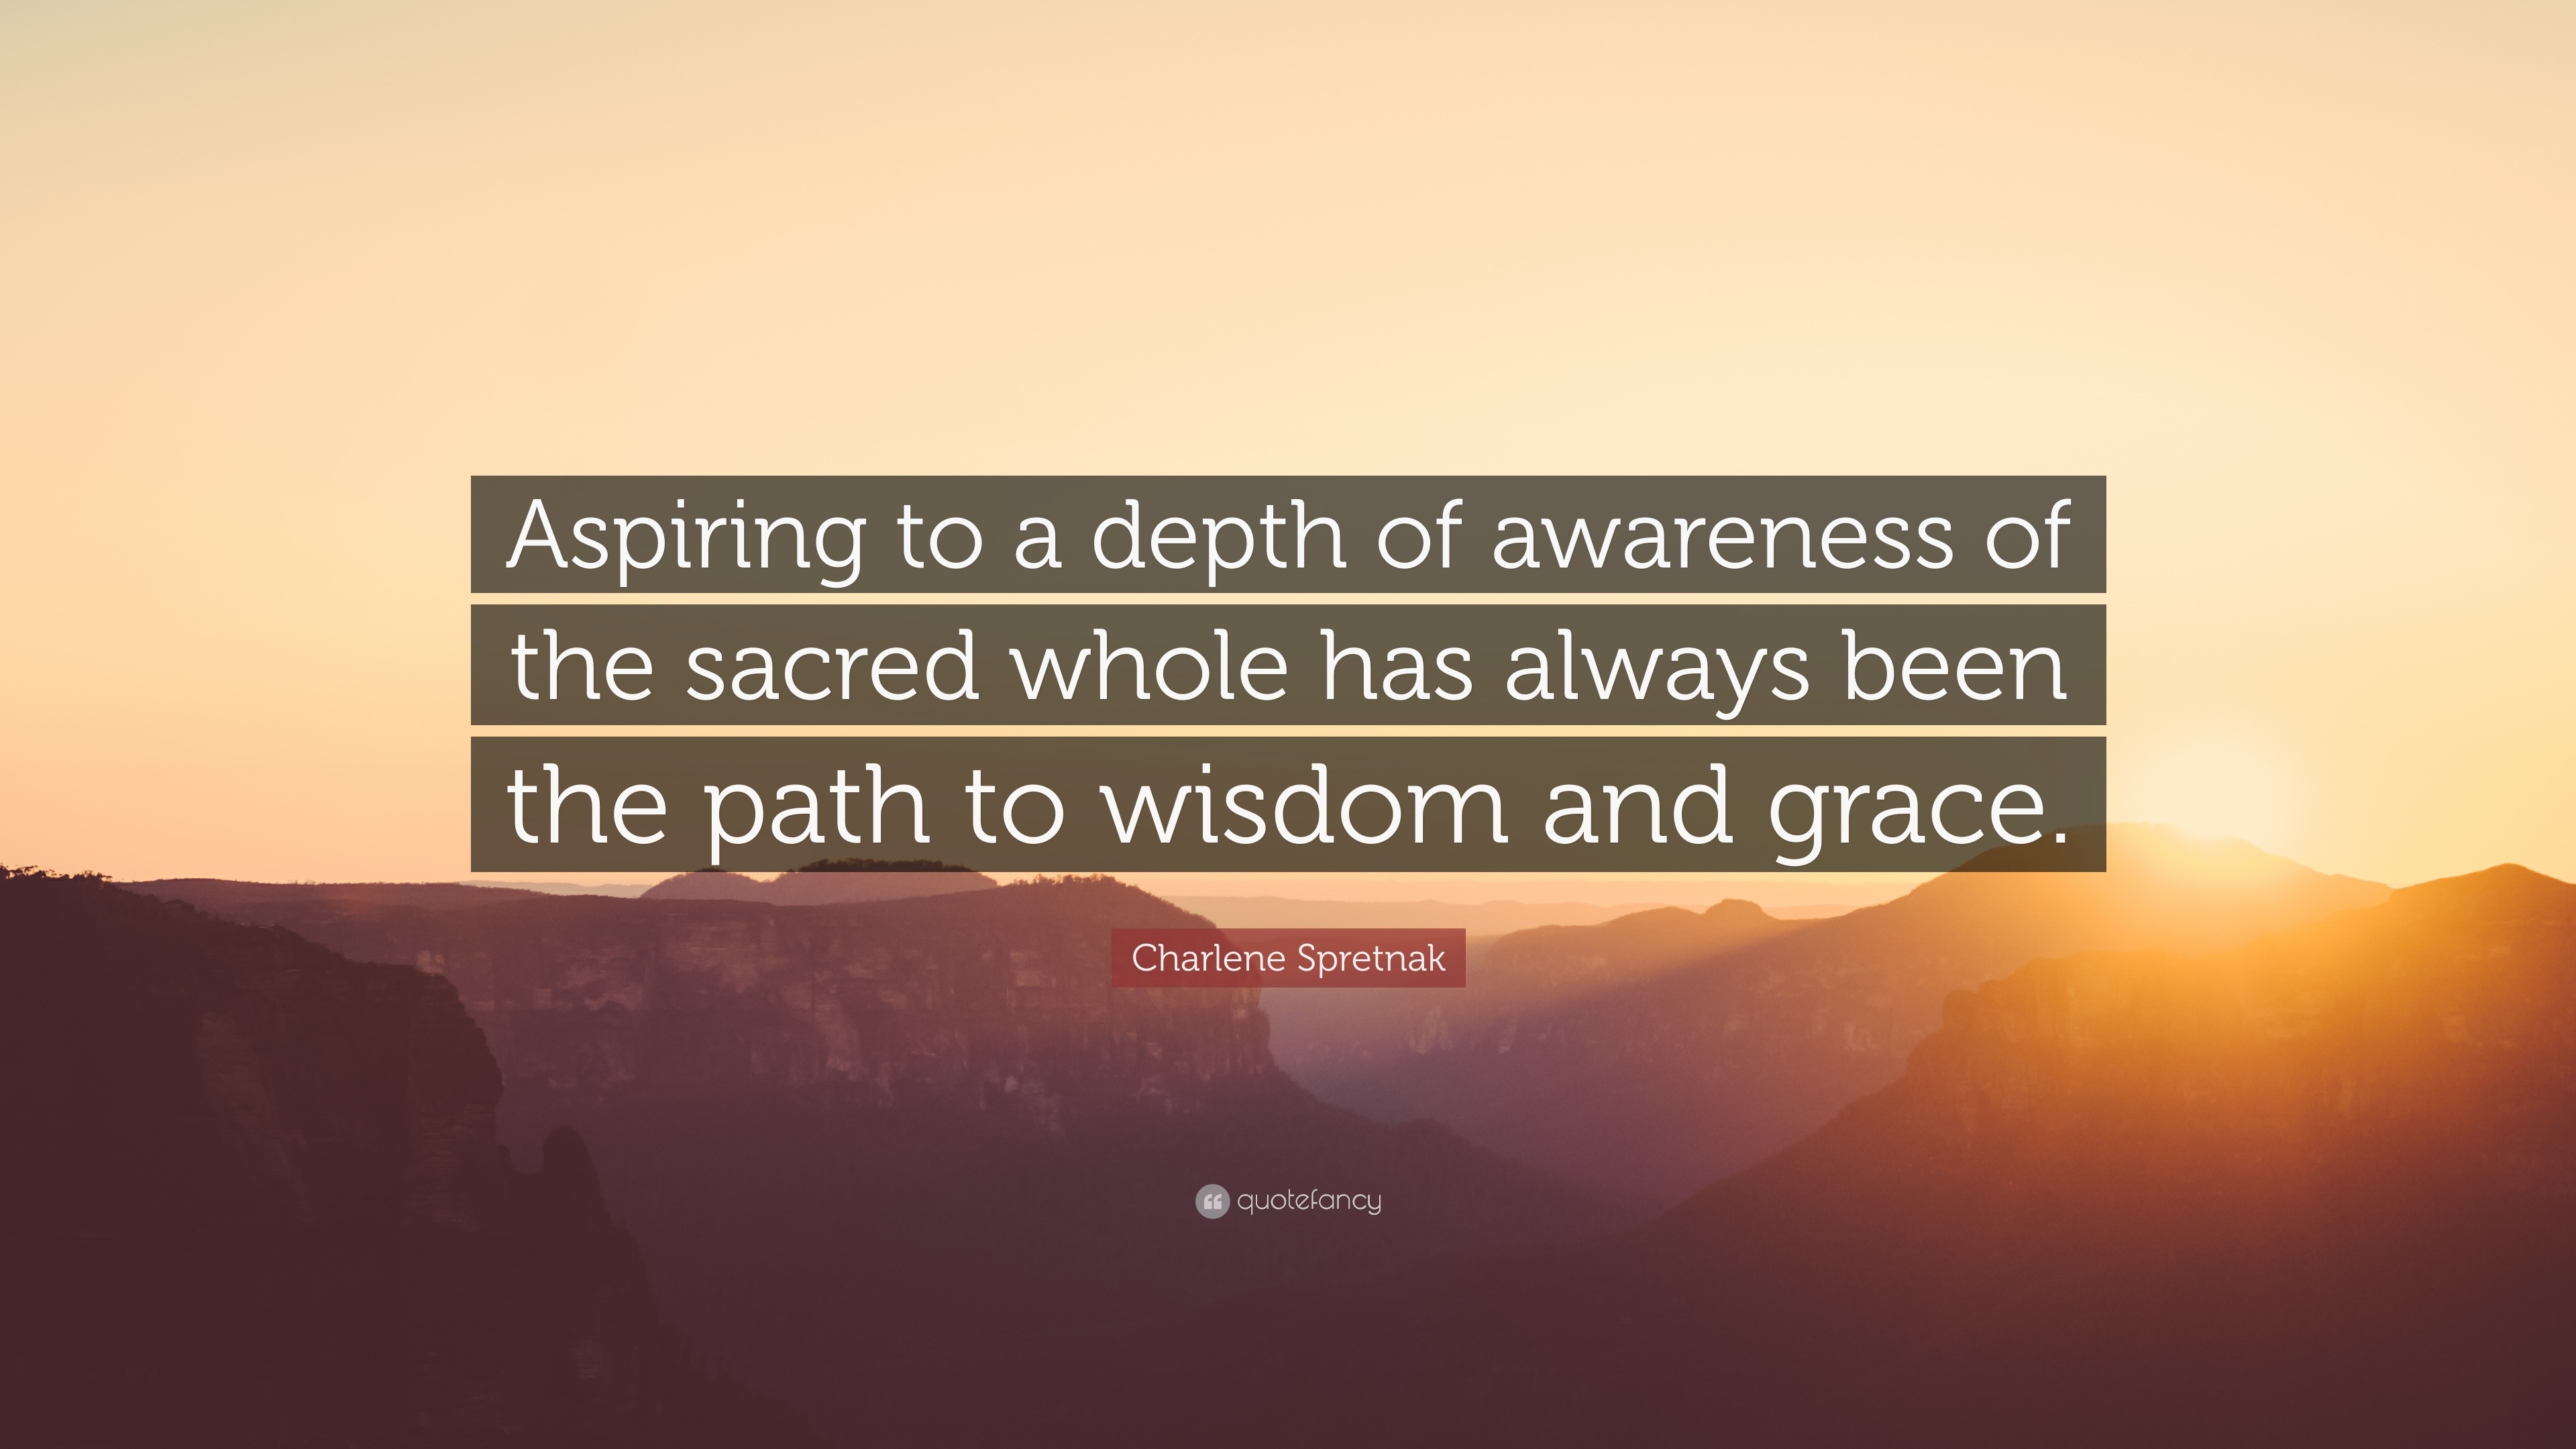 Charlene Spretnak Quote: “Aspiring to a depth of awareness of the ...